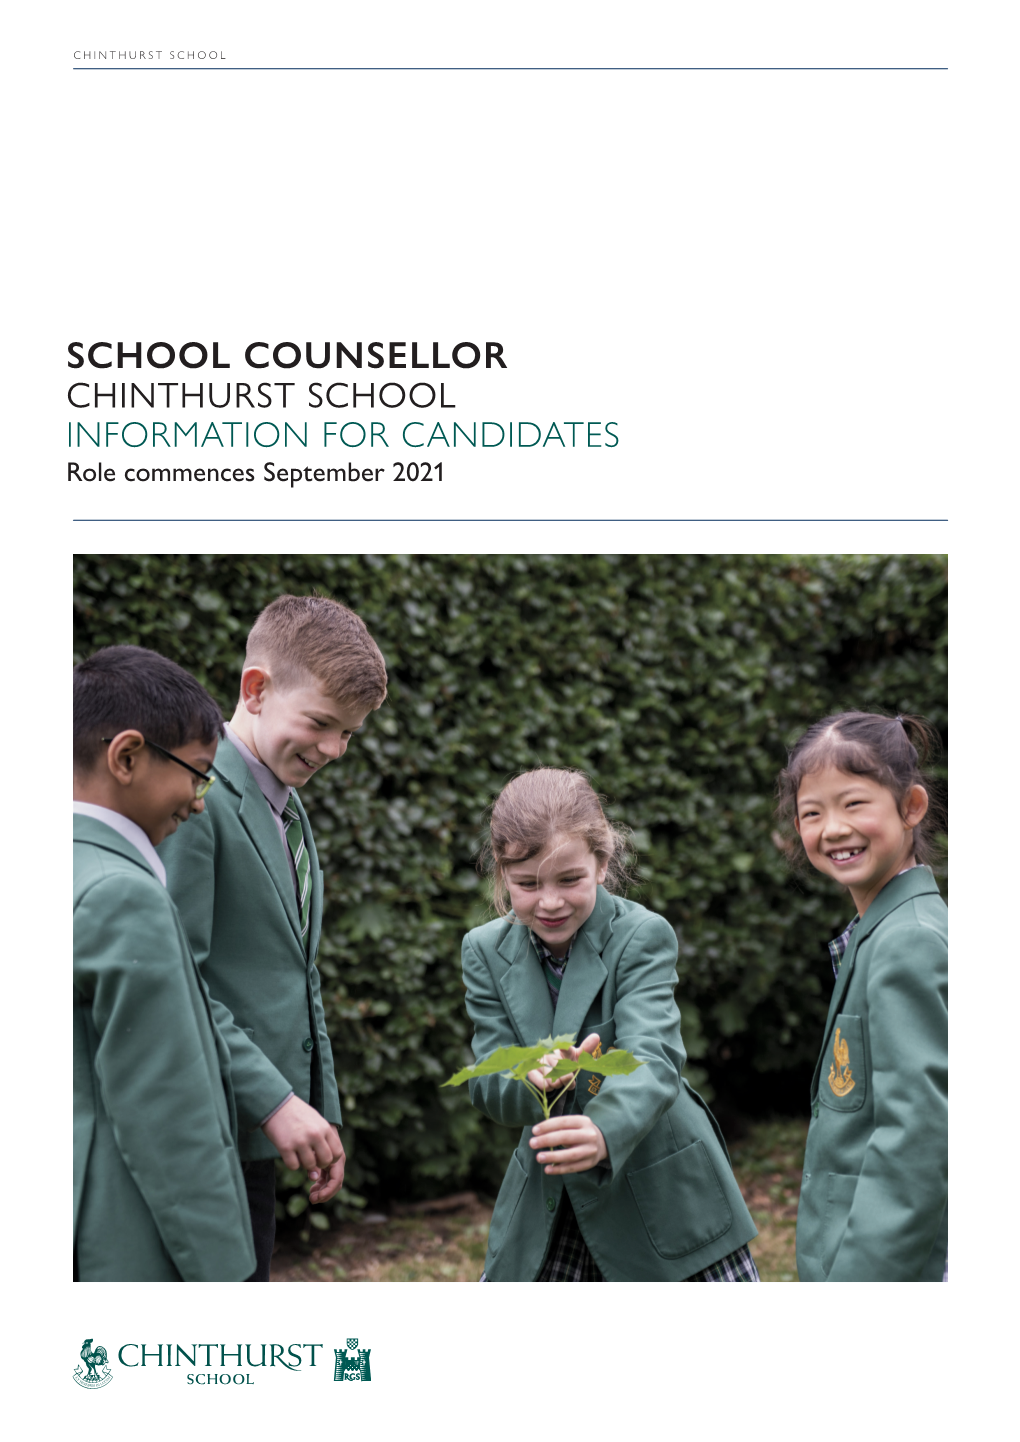 School Counsellor at Chinthurst School